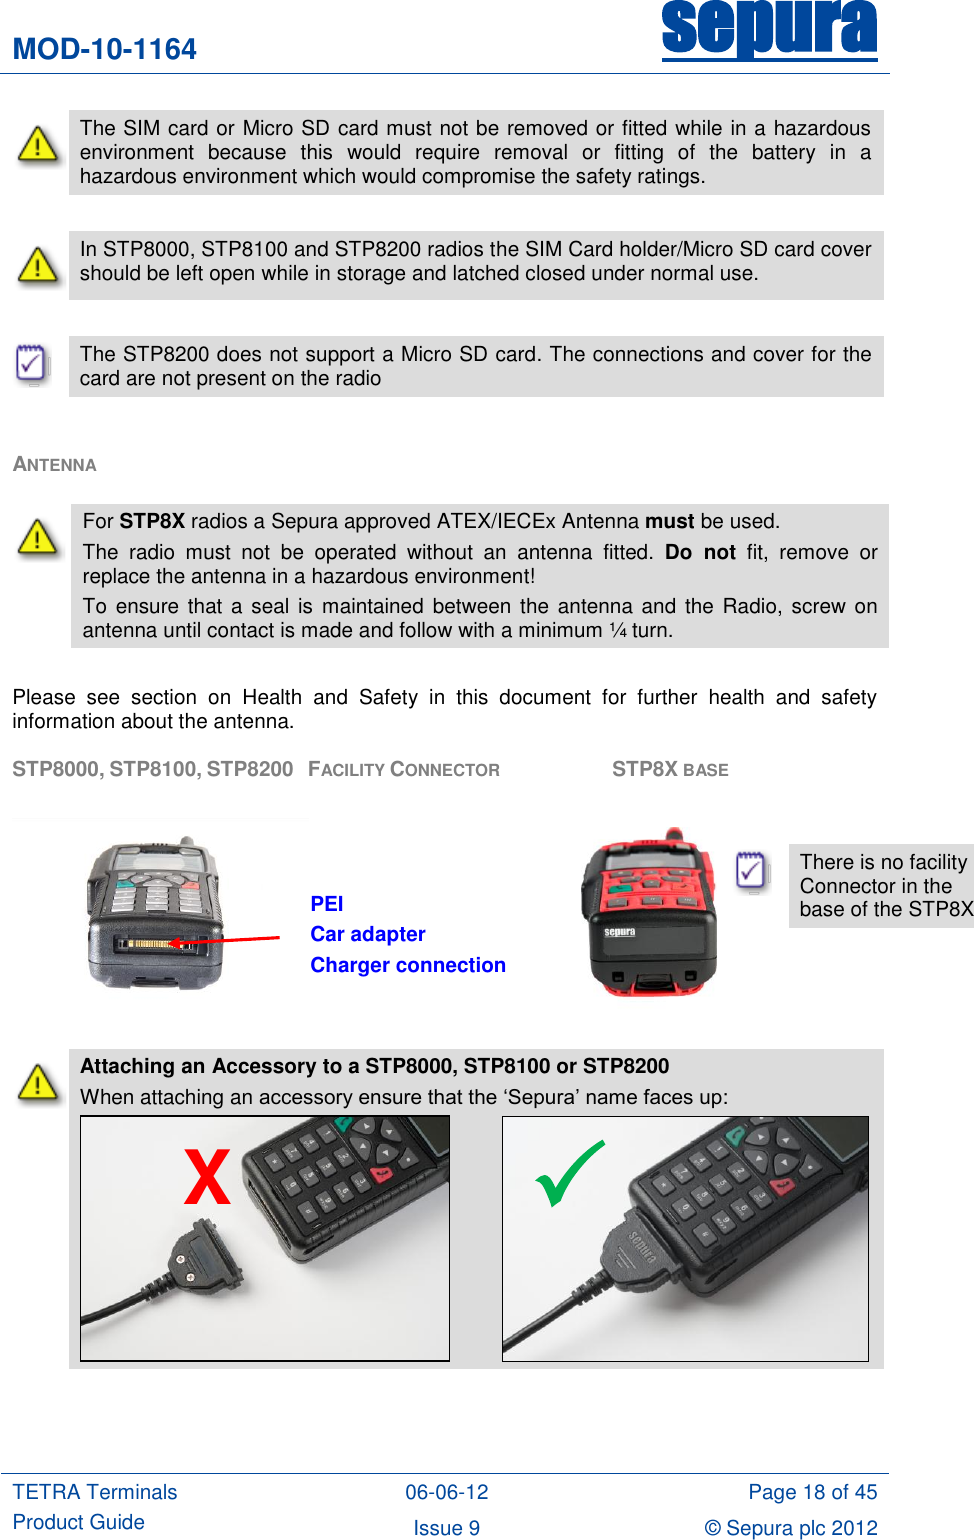 MOD-10-1164 sepura  TETRA Terminals Product Guide 06-06-12 Page 18 of 45 Issue 9 © Sepura plc 2012    The SIM card or Micro SD card must not be removed or fitted while in a hazardous environment  because  this  would  require  removal  or  fitting  of  the  battery  in  a hazardous environment which would compromise the safety ratings.   In STP8000, STP8100 and STP8200 radios the SIM Card holder/Micro SD card cover should be left open while in storage and latched closed under normal use.   The STP8200 does not support a Micro SD card. The connections and cover for the card are not present on the radio  ANTENNA  Please  see  section  on  Health  and  Safety  in  this  document  for  further  health  and  safety information about the antenna. STP8000, STP8100, STP8200   FACILITY CONNECTOR       STP8X BASE                                                            Attaching an Accessory to a STP8000, STP8100 or STP8200 When attaching an accessory ensure that the „Sepura‟ name faces up:      For STP8X radios a Sepura approved ATEX/IECEx Antenna must be used. The  radio  must  not  be  operated  without  an  antenna  fitted.  Do  not  fit,  remove  or replace the antenna in a hazardous environment! To  ensure  that  a  seal  is  maintained  between the antenna and  the  Radio, screw on antenna until contact is made and follow with a minimum ¼ turn. X PEI Car adapter Charger connection   There is no facility Connector in the base of the STP8X  